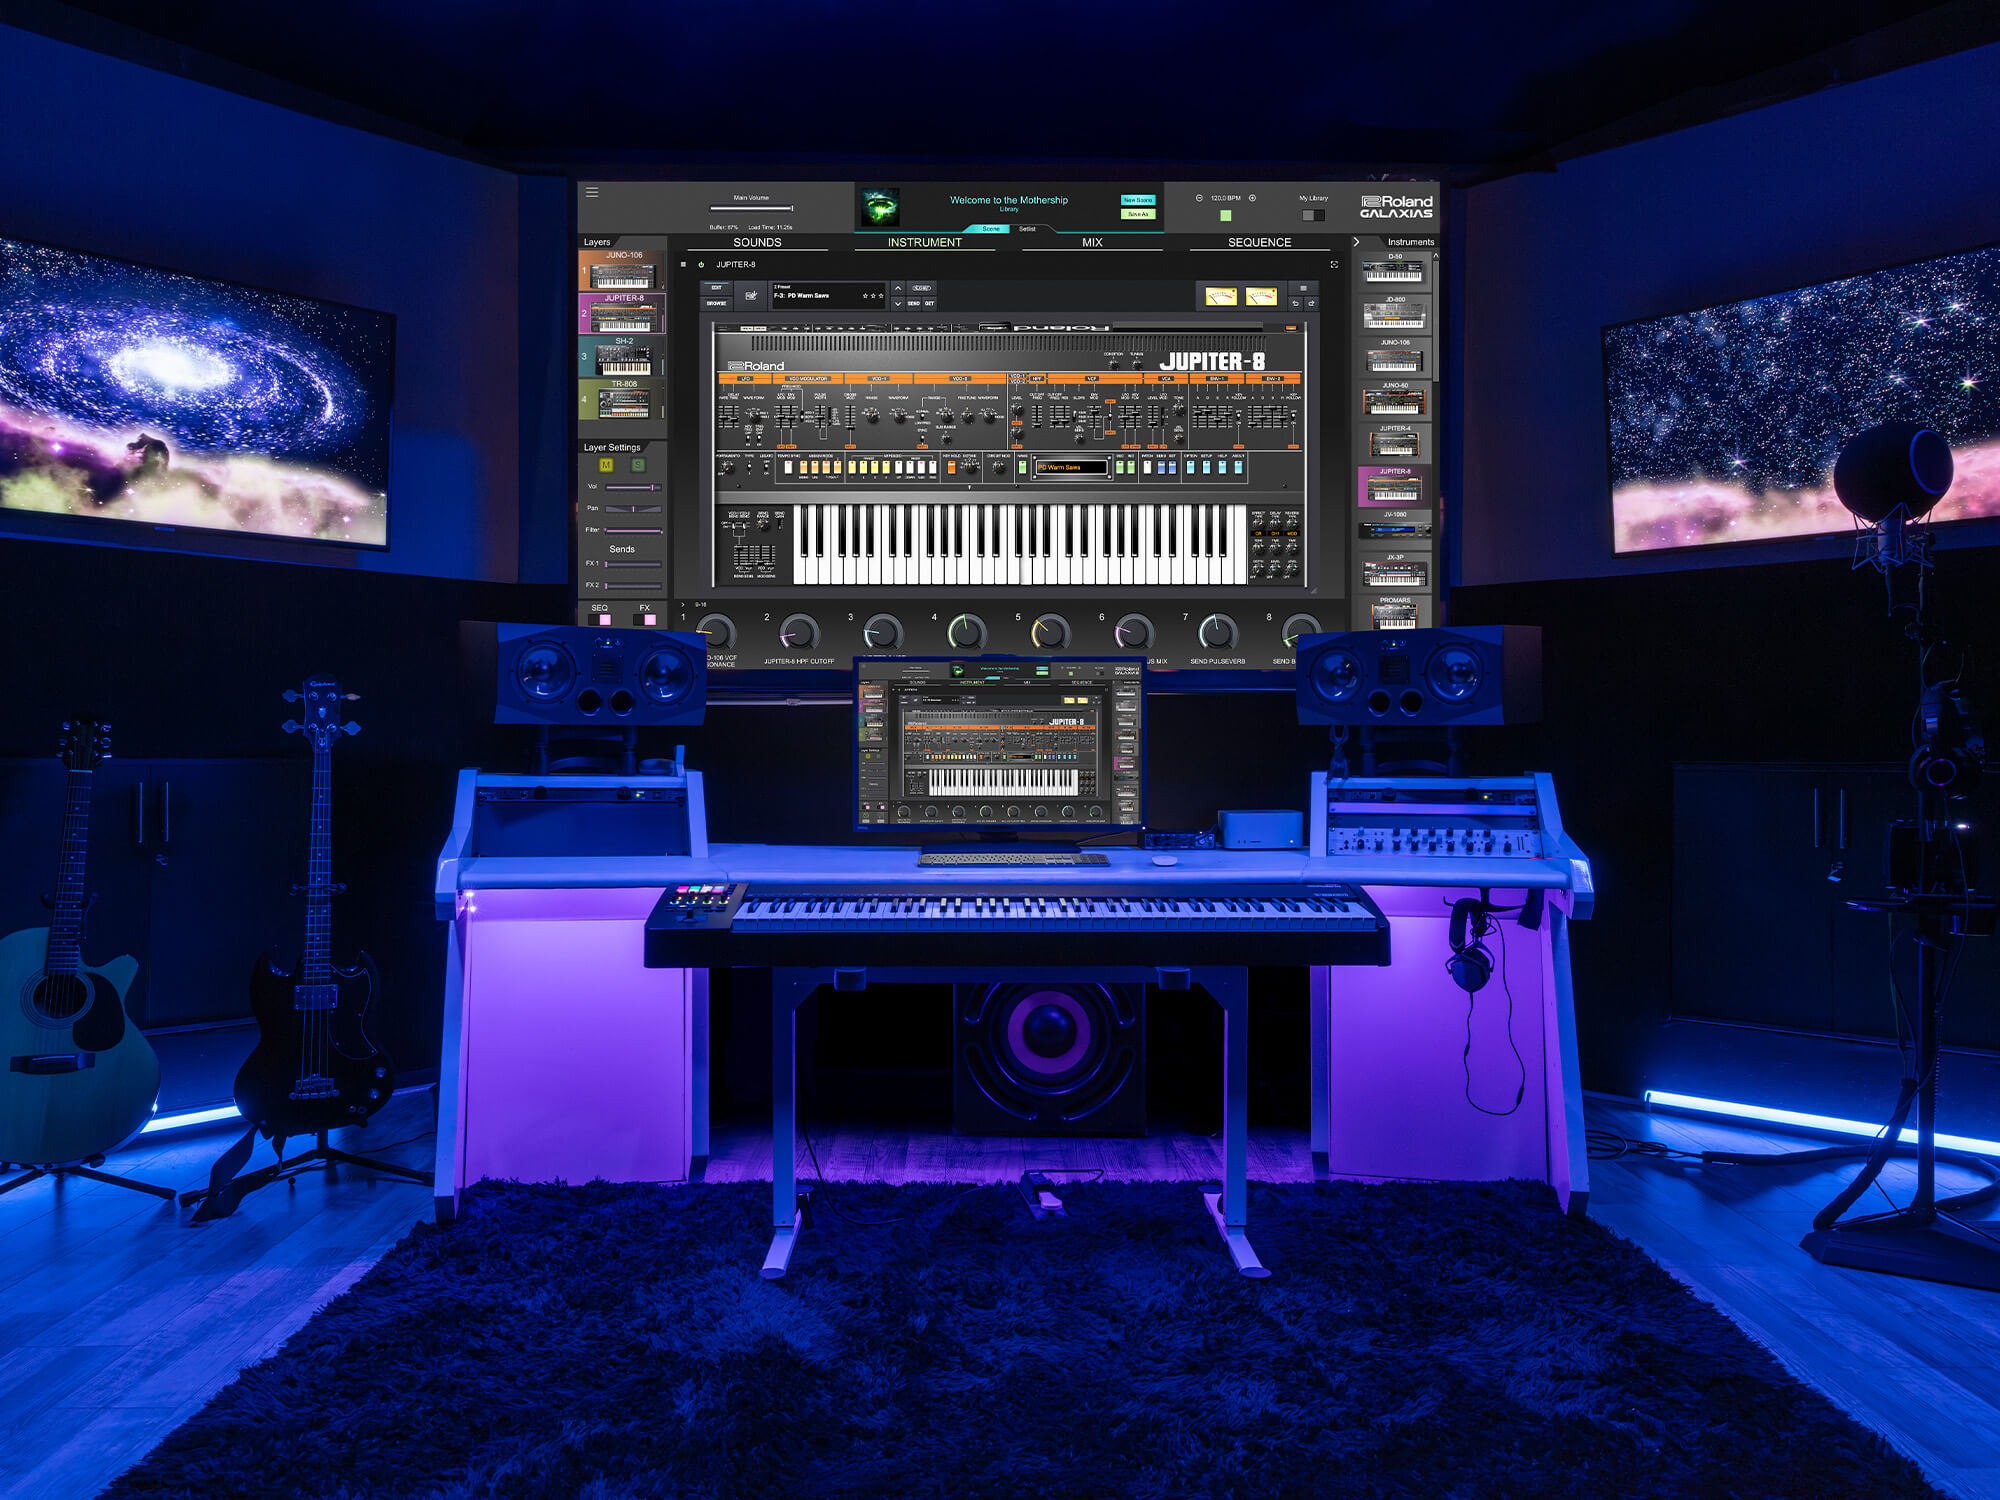 Roland GALAXIAS in use on a large monitor in a studio. The studio is glowing with a purple light.